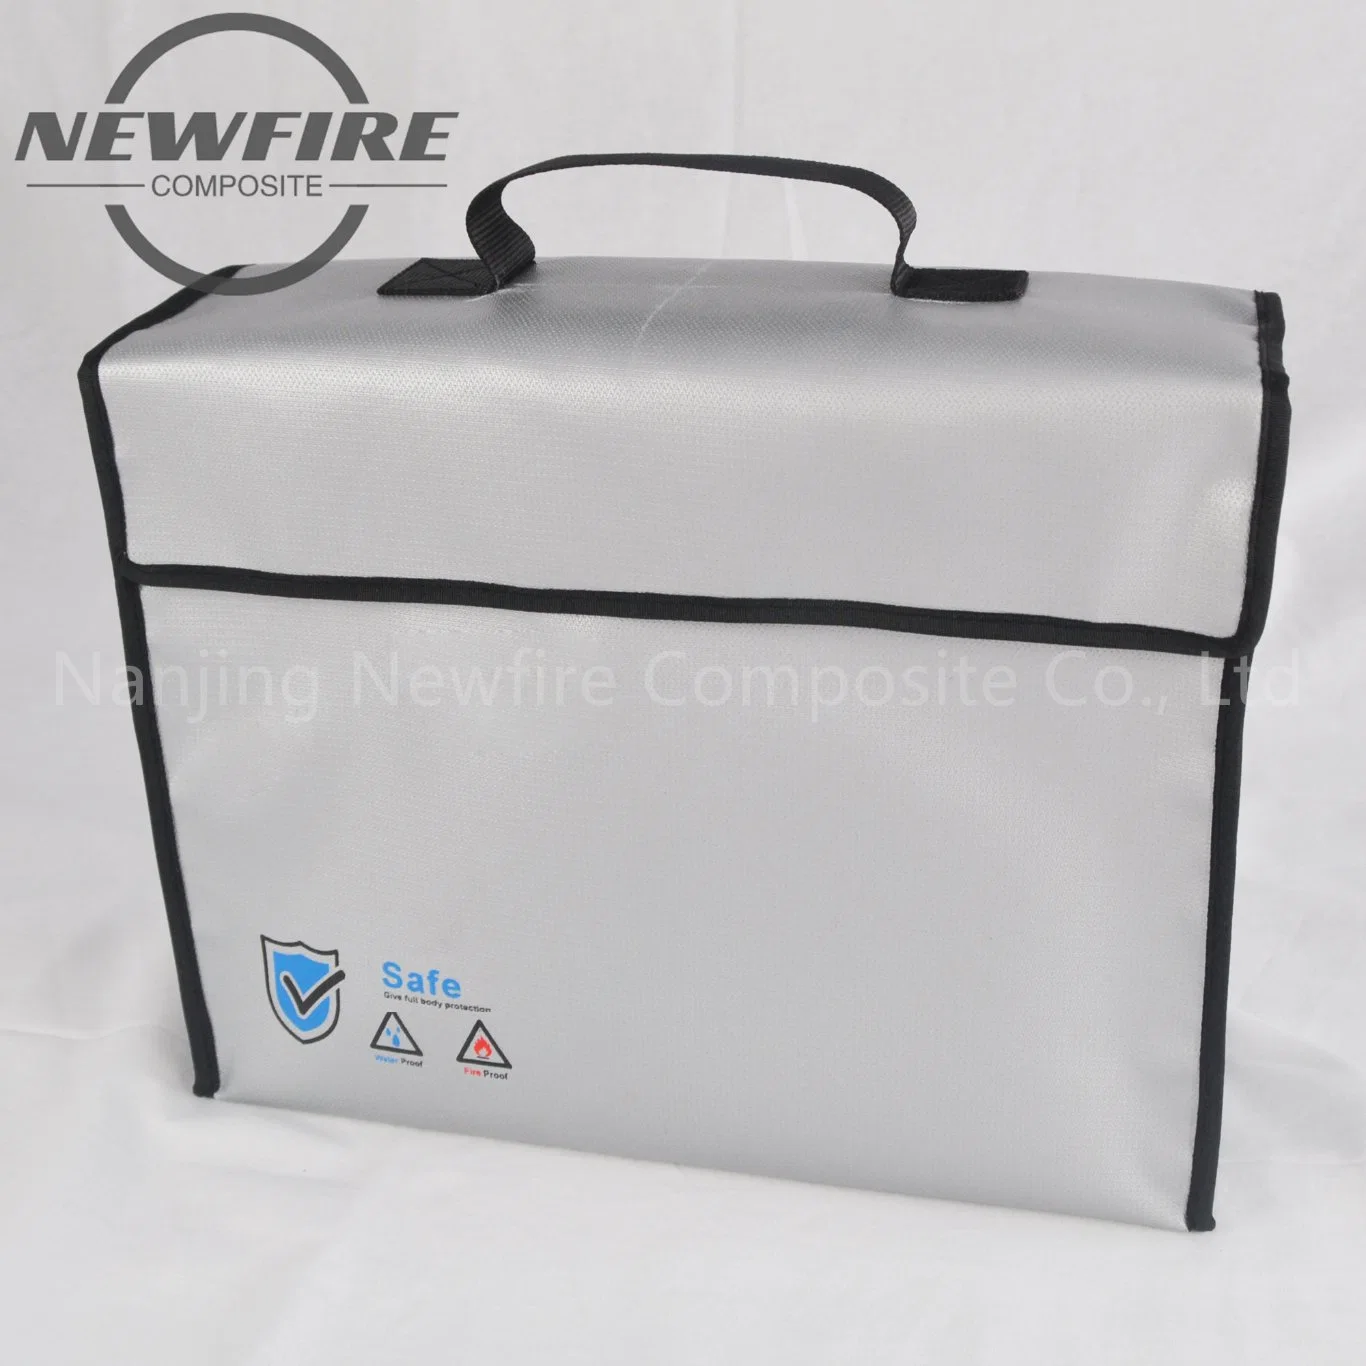 Fireproof Waterproof Money Document Bags Fireproof Document Organizer File Box with Lock High Quality Silicone Fiberglass Bags/Silicone Bags